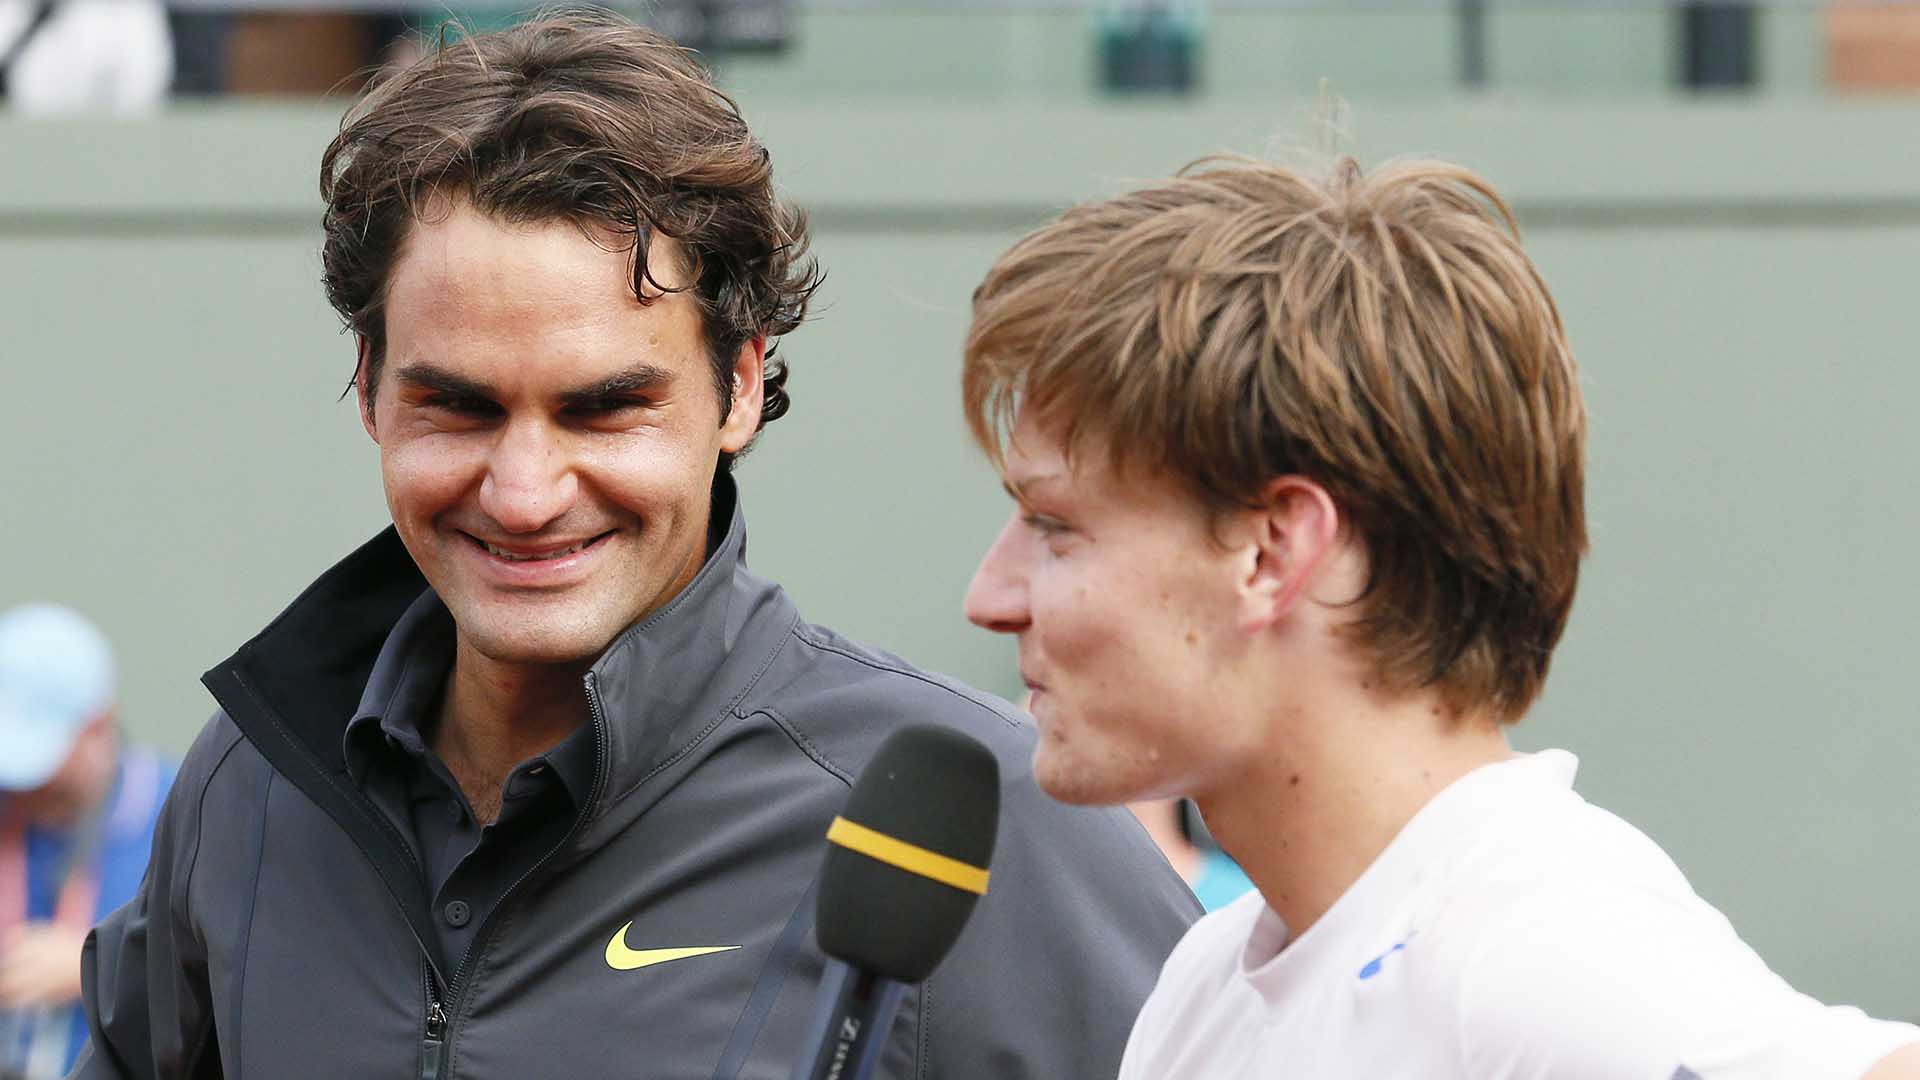 Roger Federer and David Goffin share a joint on-court interview after their 2012 Roland Garros Round of 16 match on Court Suzanne-Lenglen.